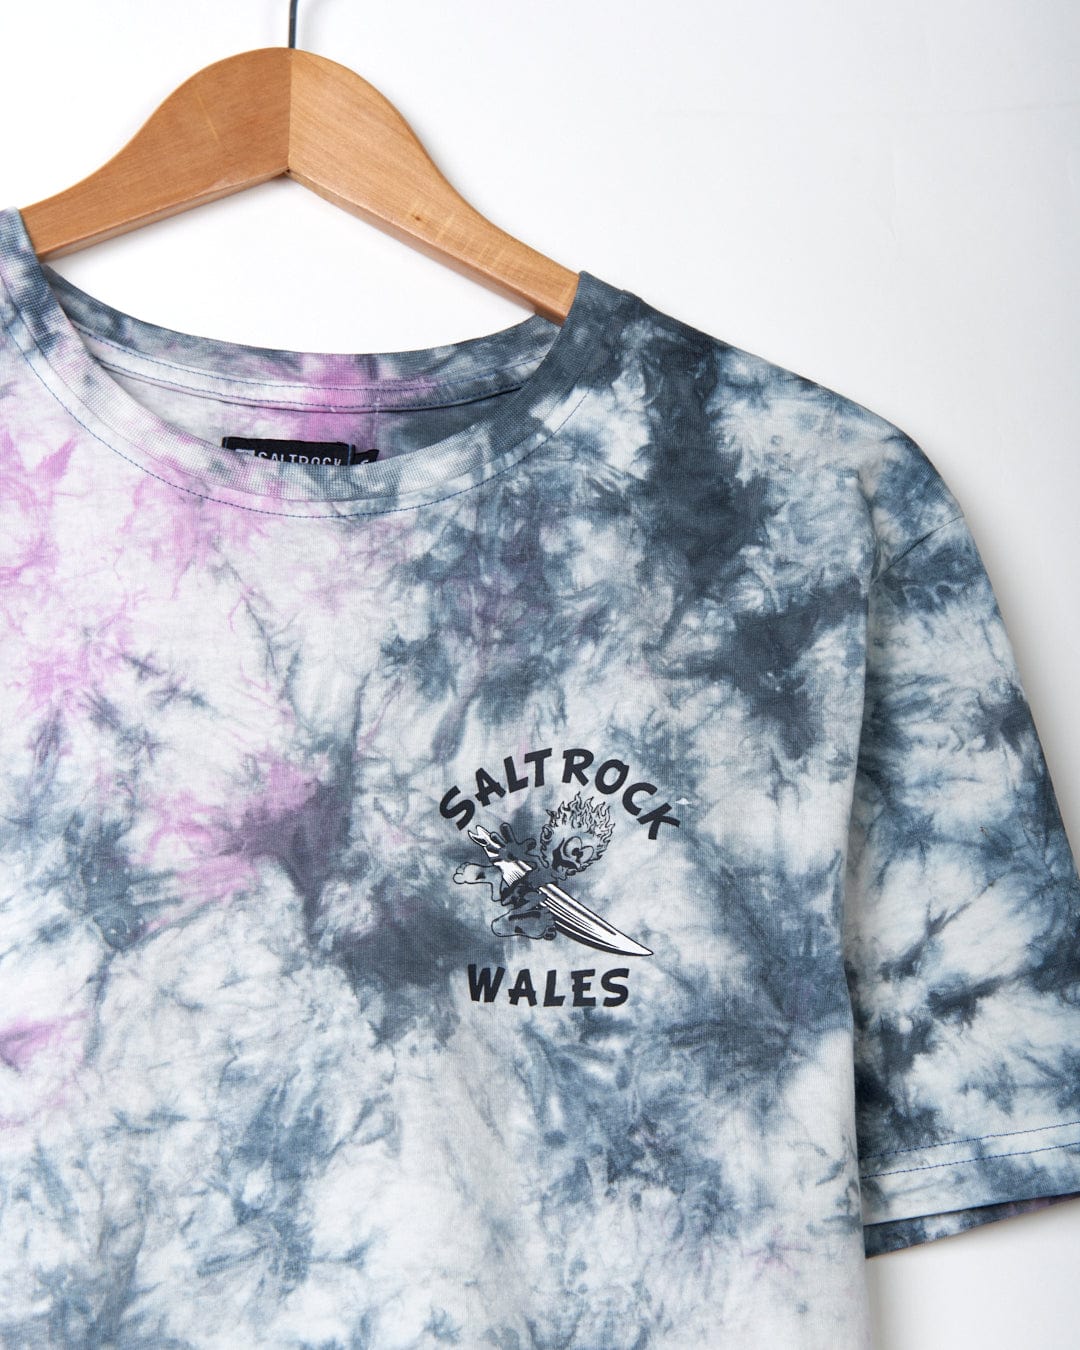 Wave Rider Wales - Mens Short Sleeve T-Shirt - Pink Tie Dye with "Saltrock" logo hanging on a wooden hanger against a white background, made from 100% Cotton.